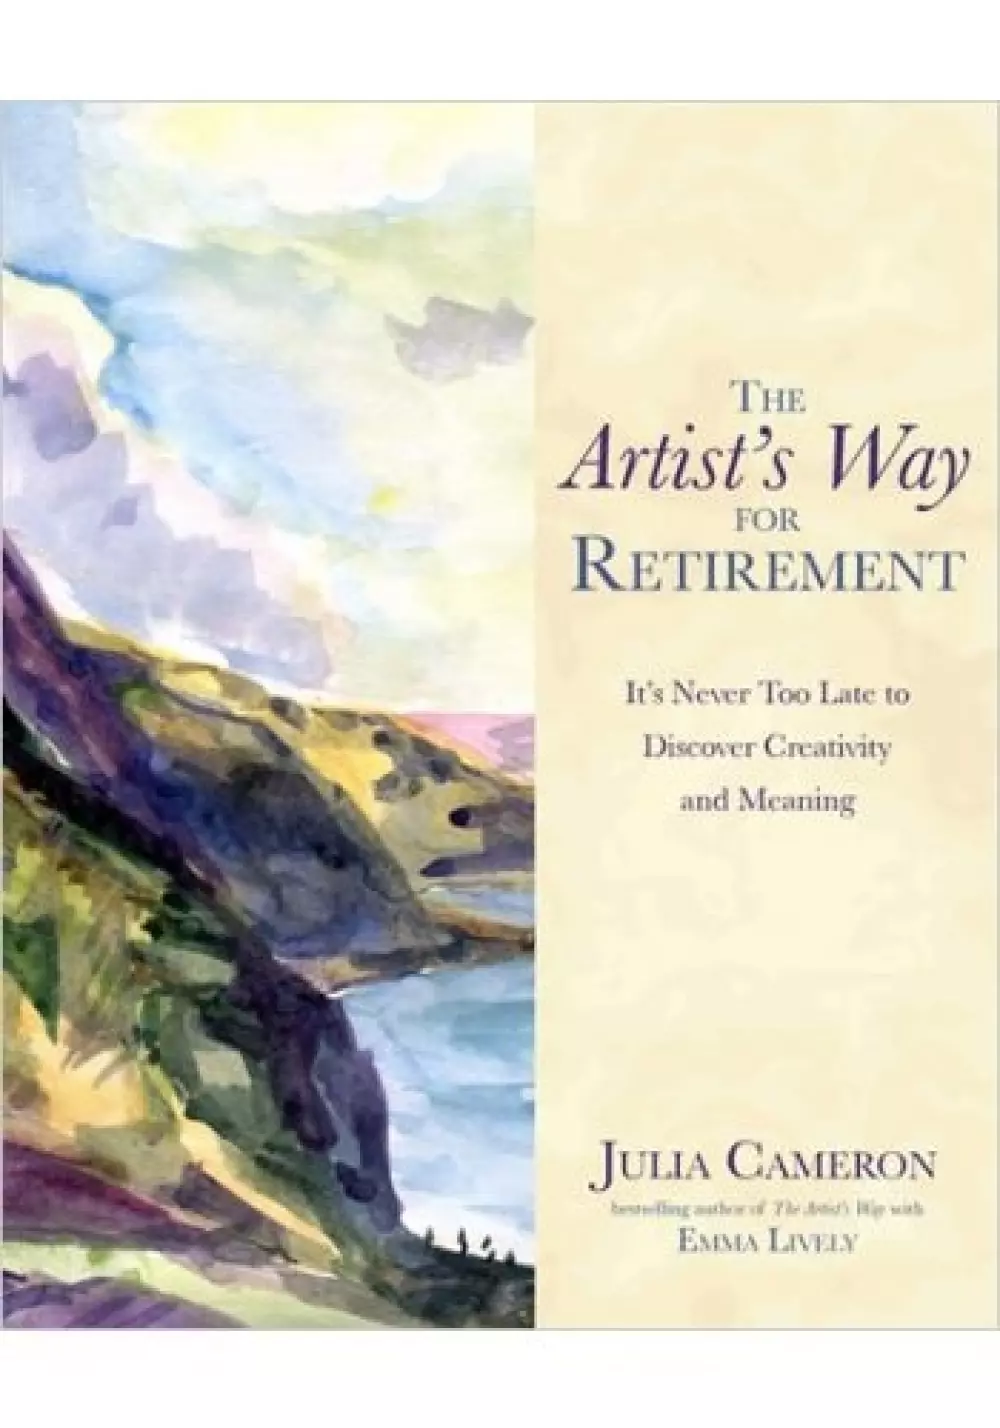 The Artist's Way for Retirement, Bøker, Intuisjon & selvutvikling, It`s Never Too Late to Discover Creativity and Meaning